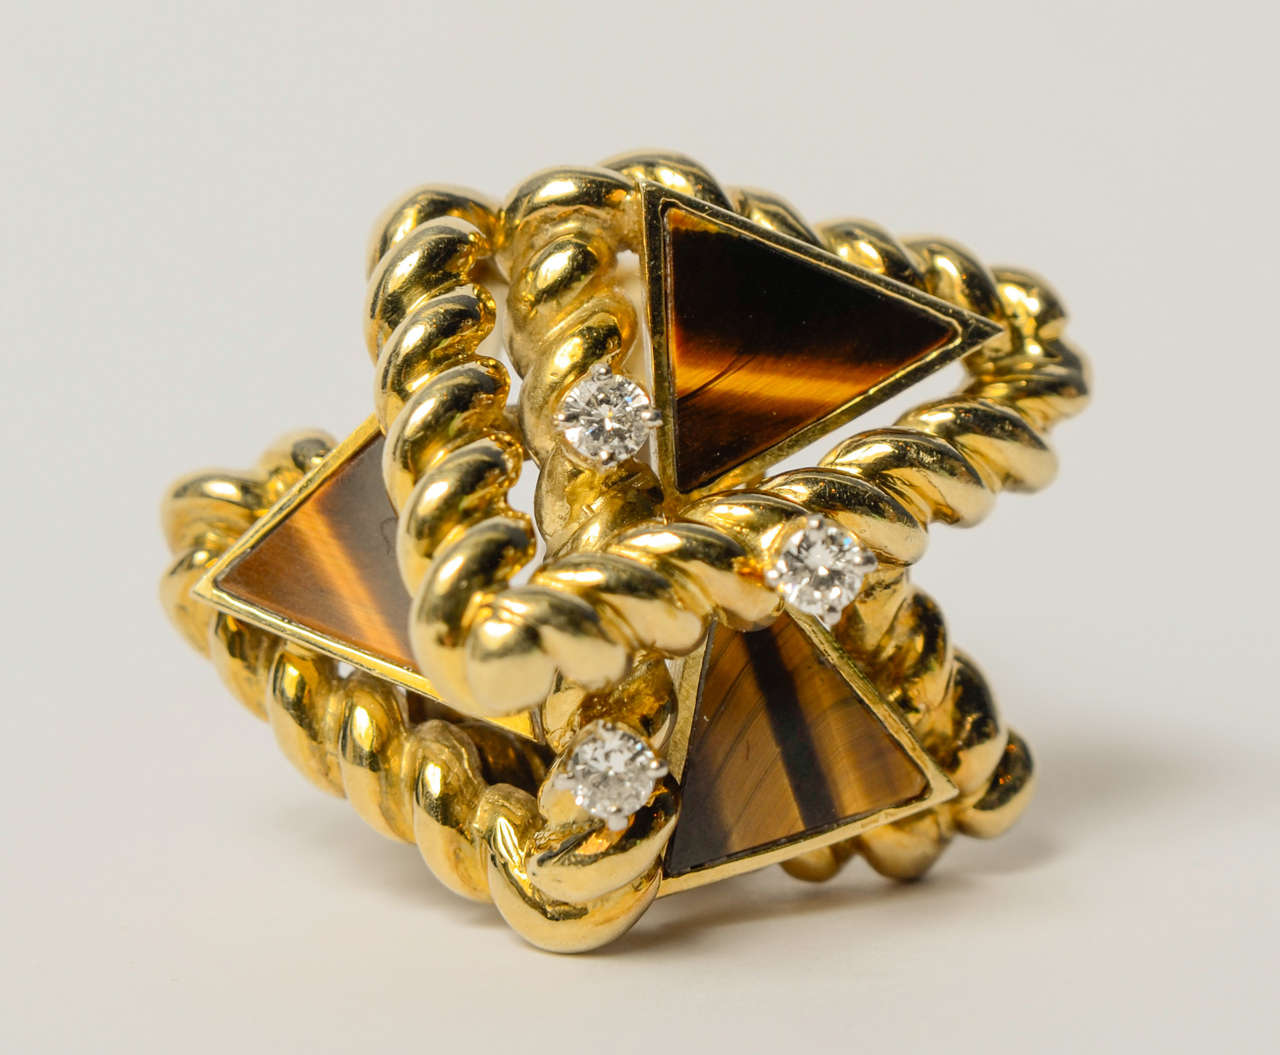 Ring in Yellow gold, Tiger's Eye and Diamonds
Circa 1970